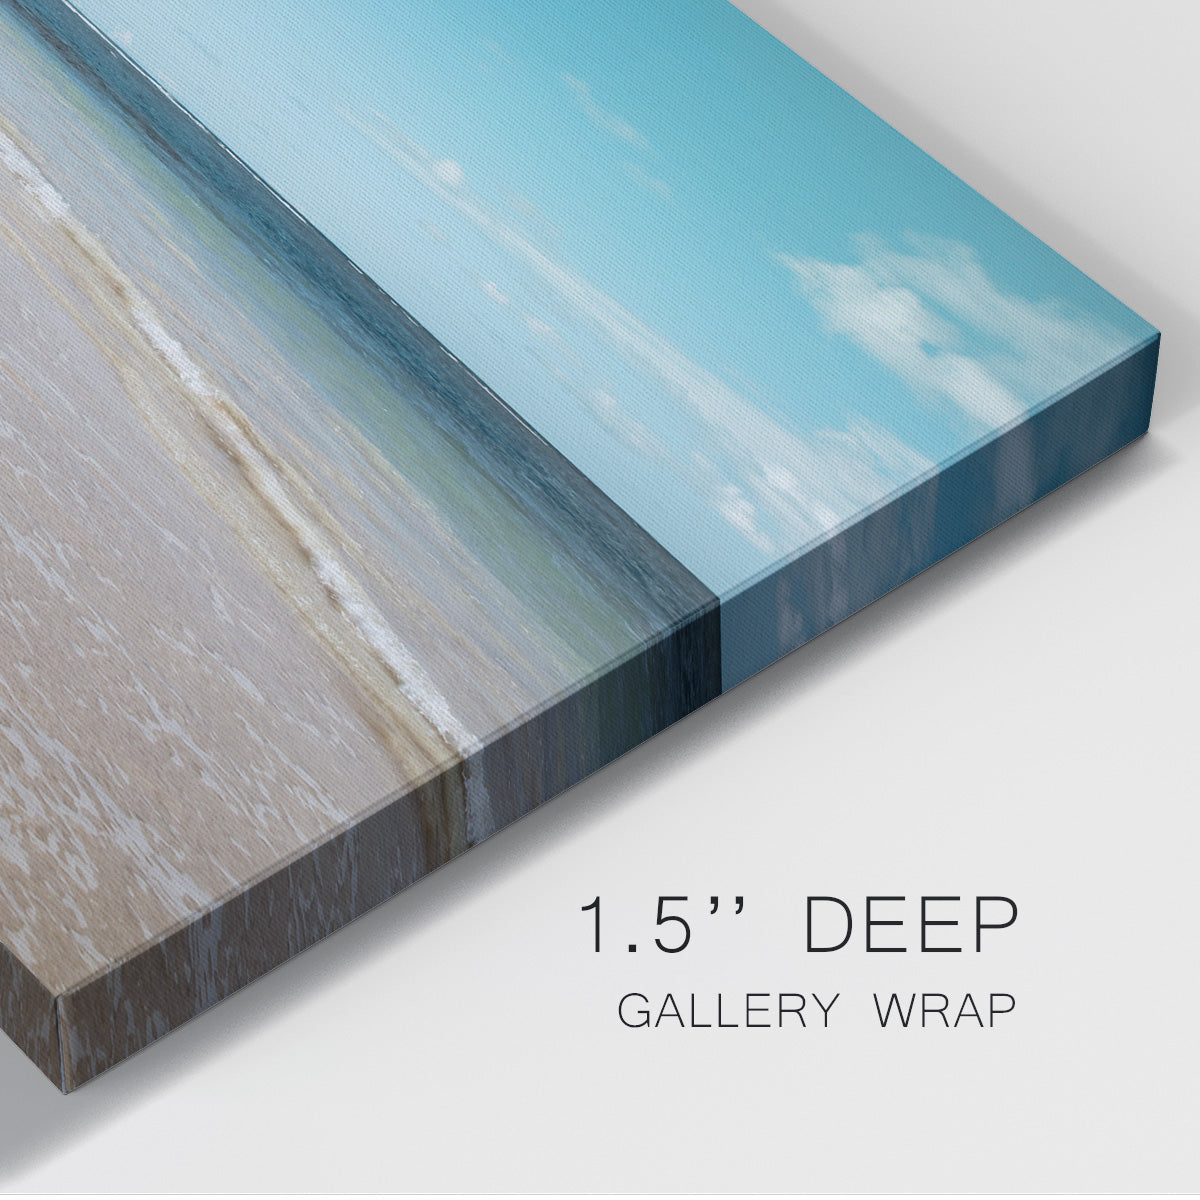 Sugar Sand Beach Premium Gallery Wrapped Canvas - Ready to Hang